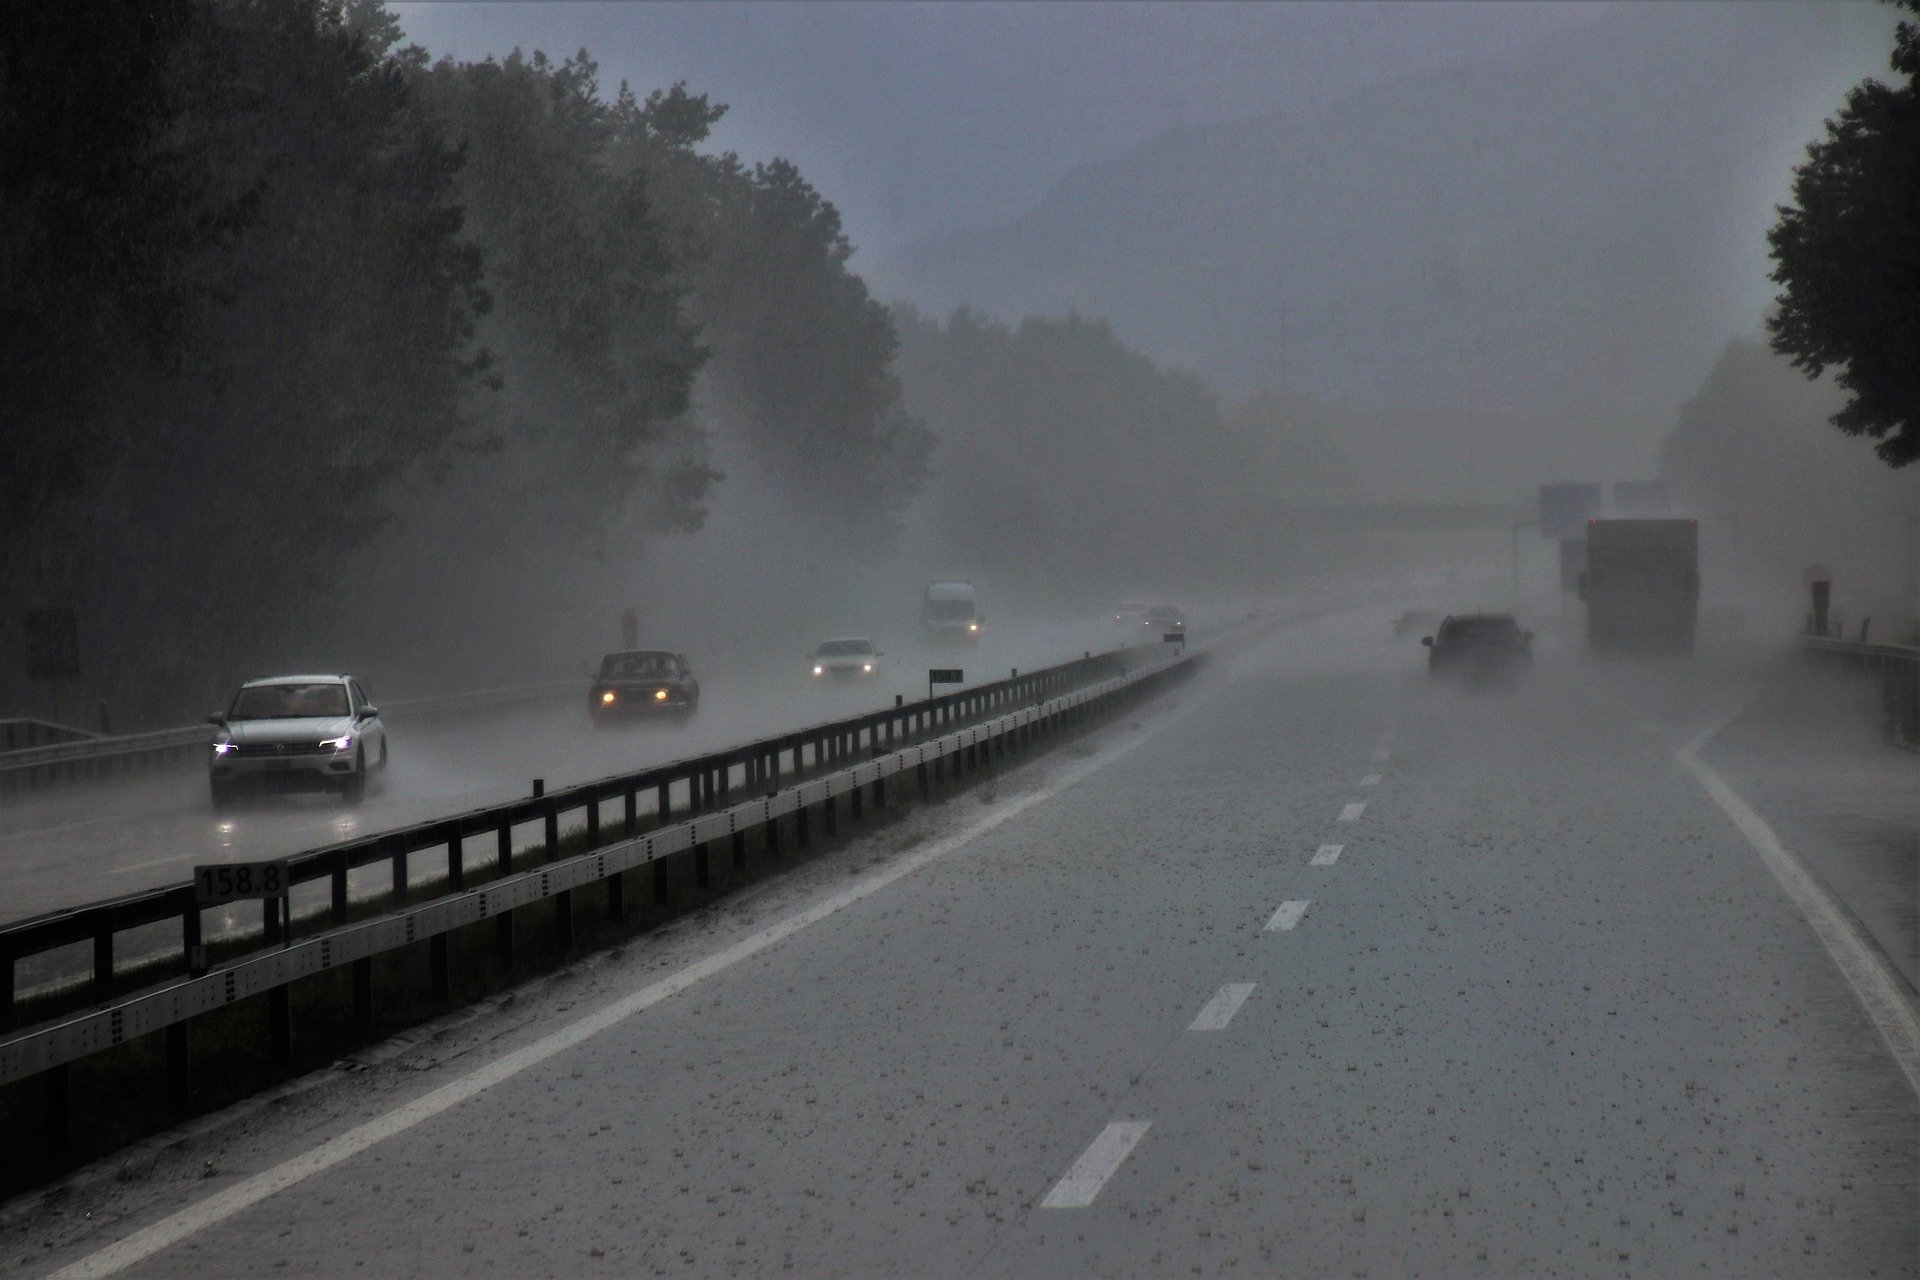 Pictured - Vehicles traveling on the highway during the rain and misty conditions | Source: Pixabay